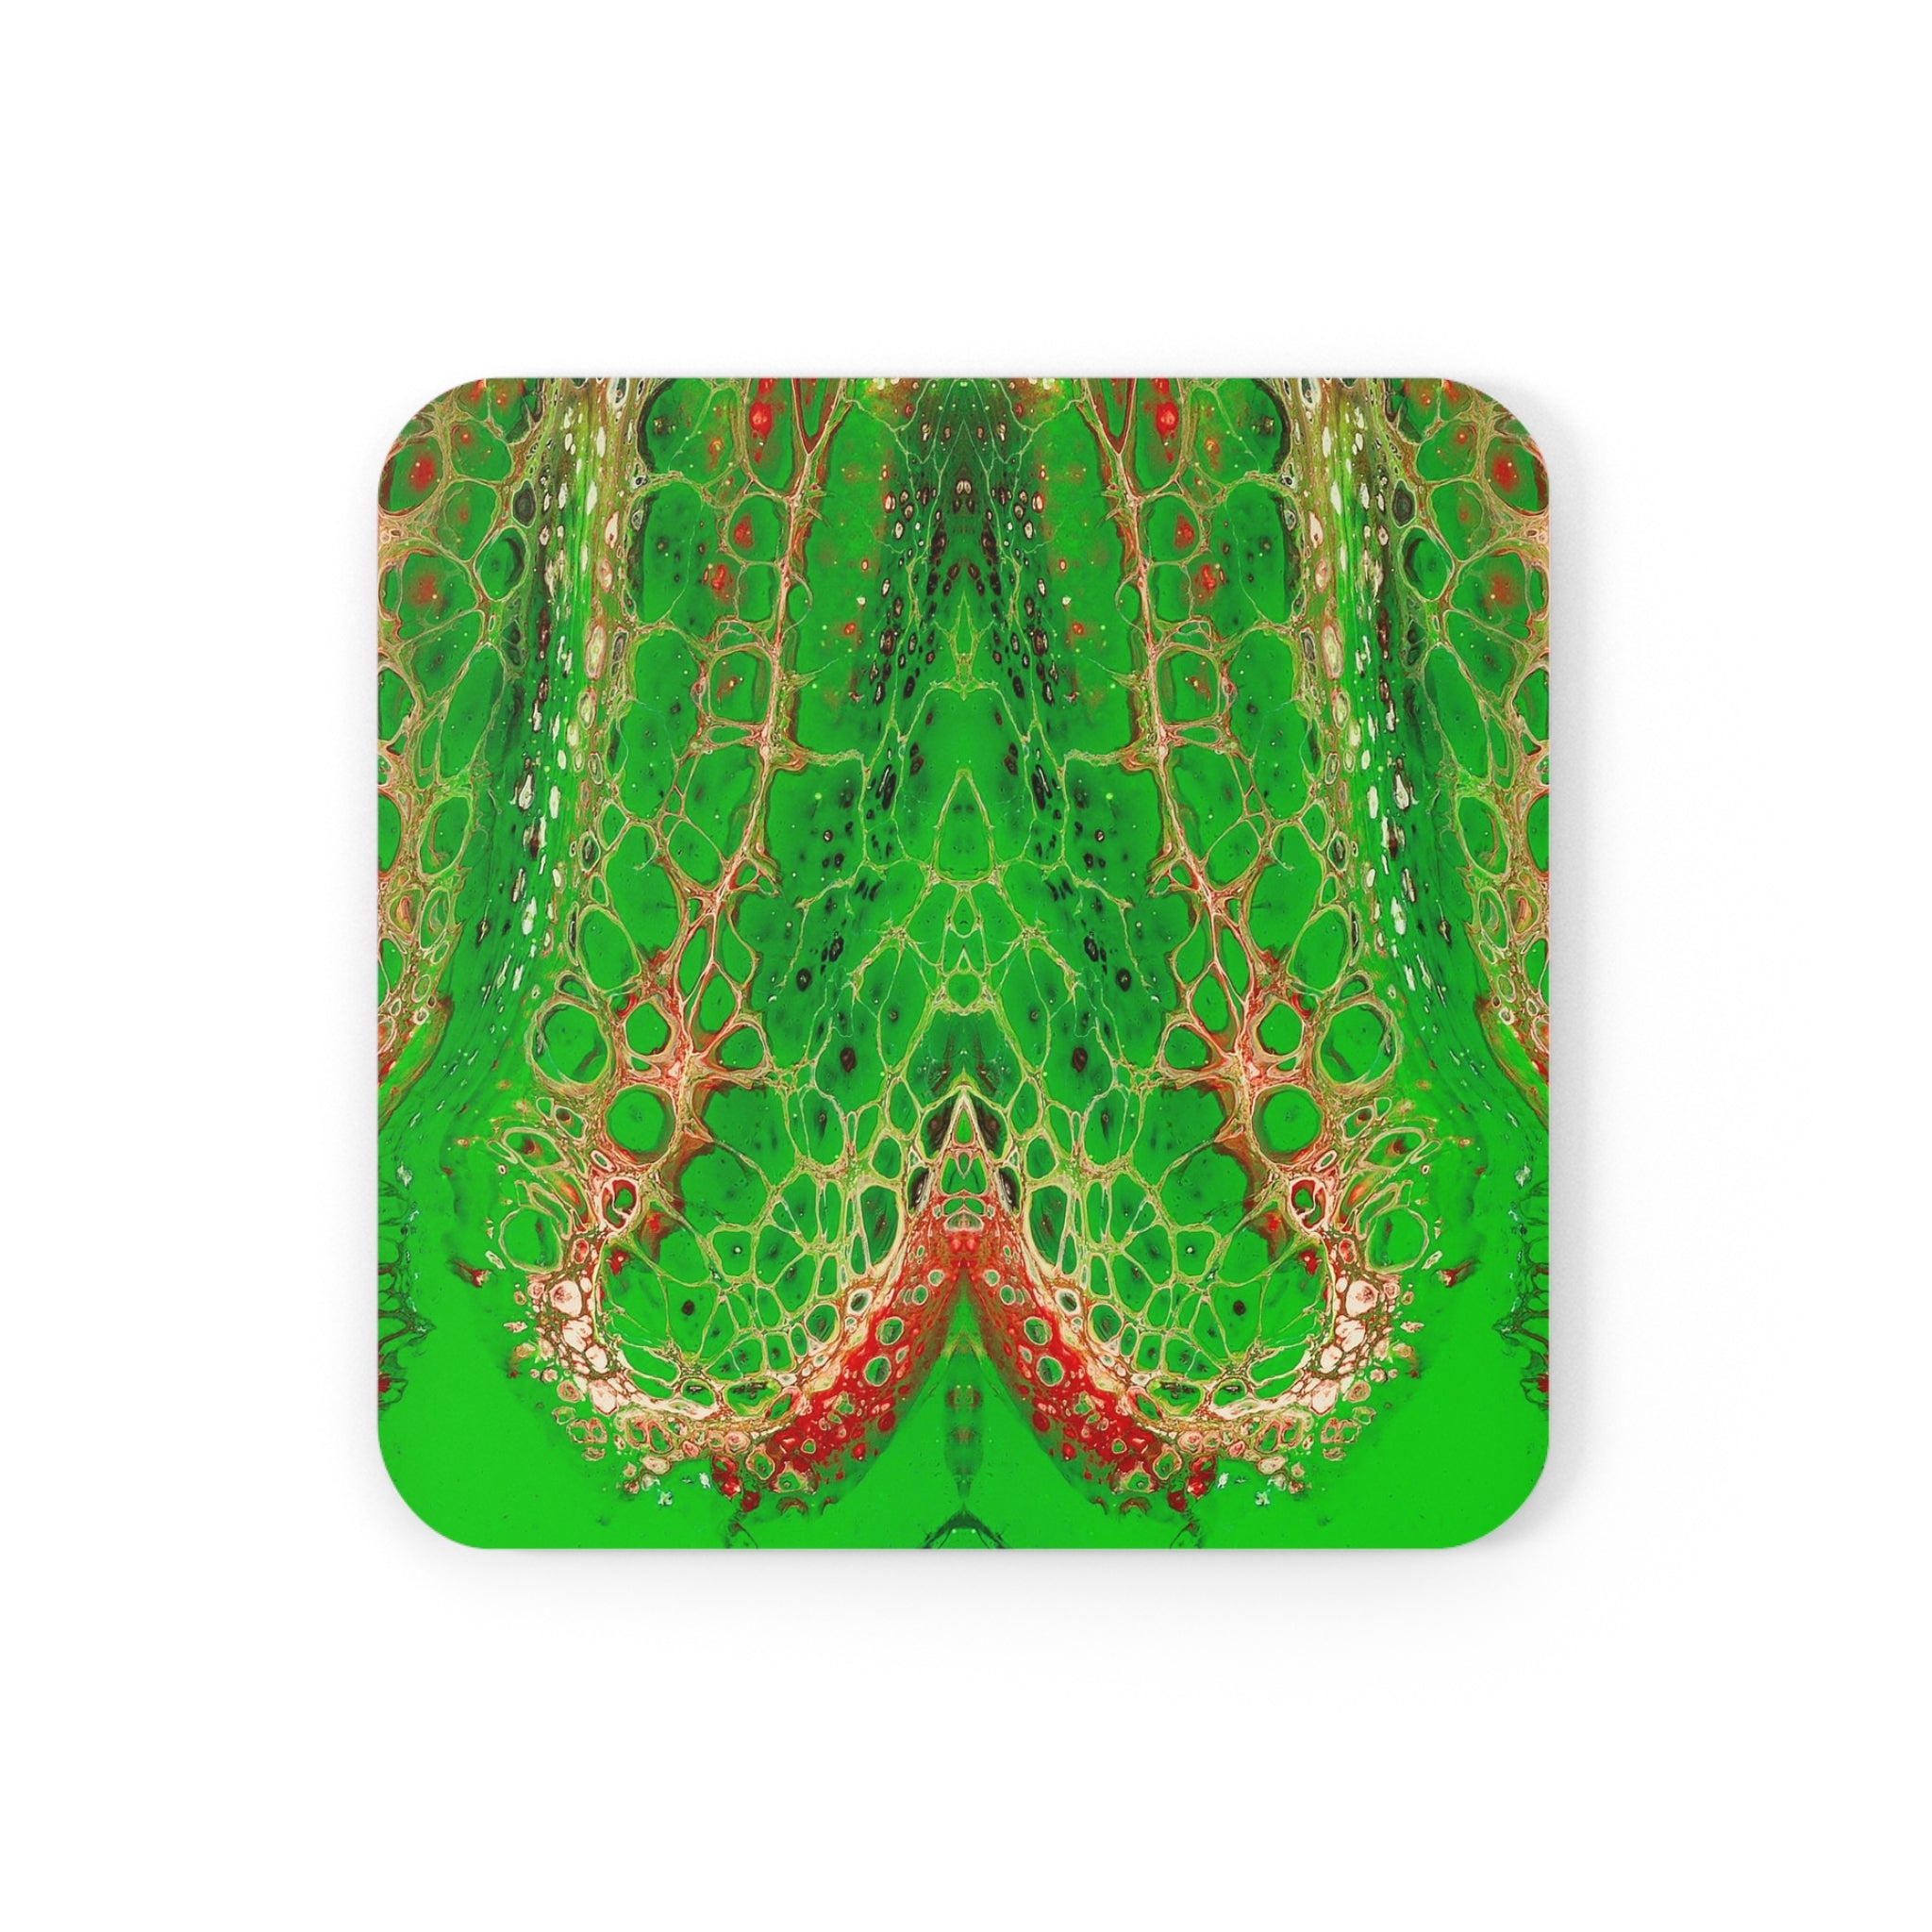 Cameron Creations - Gardens Of Grendaxi - Stylish Coffee Coaster - Square Front